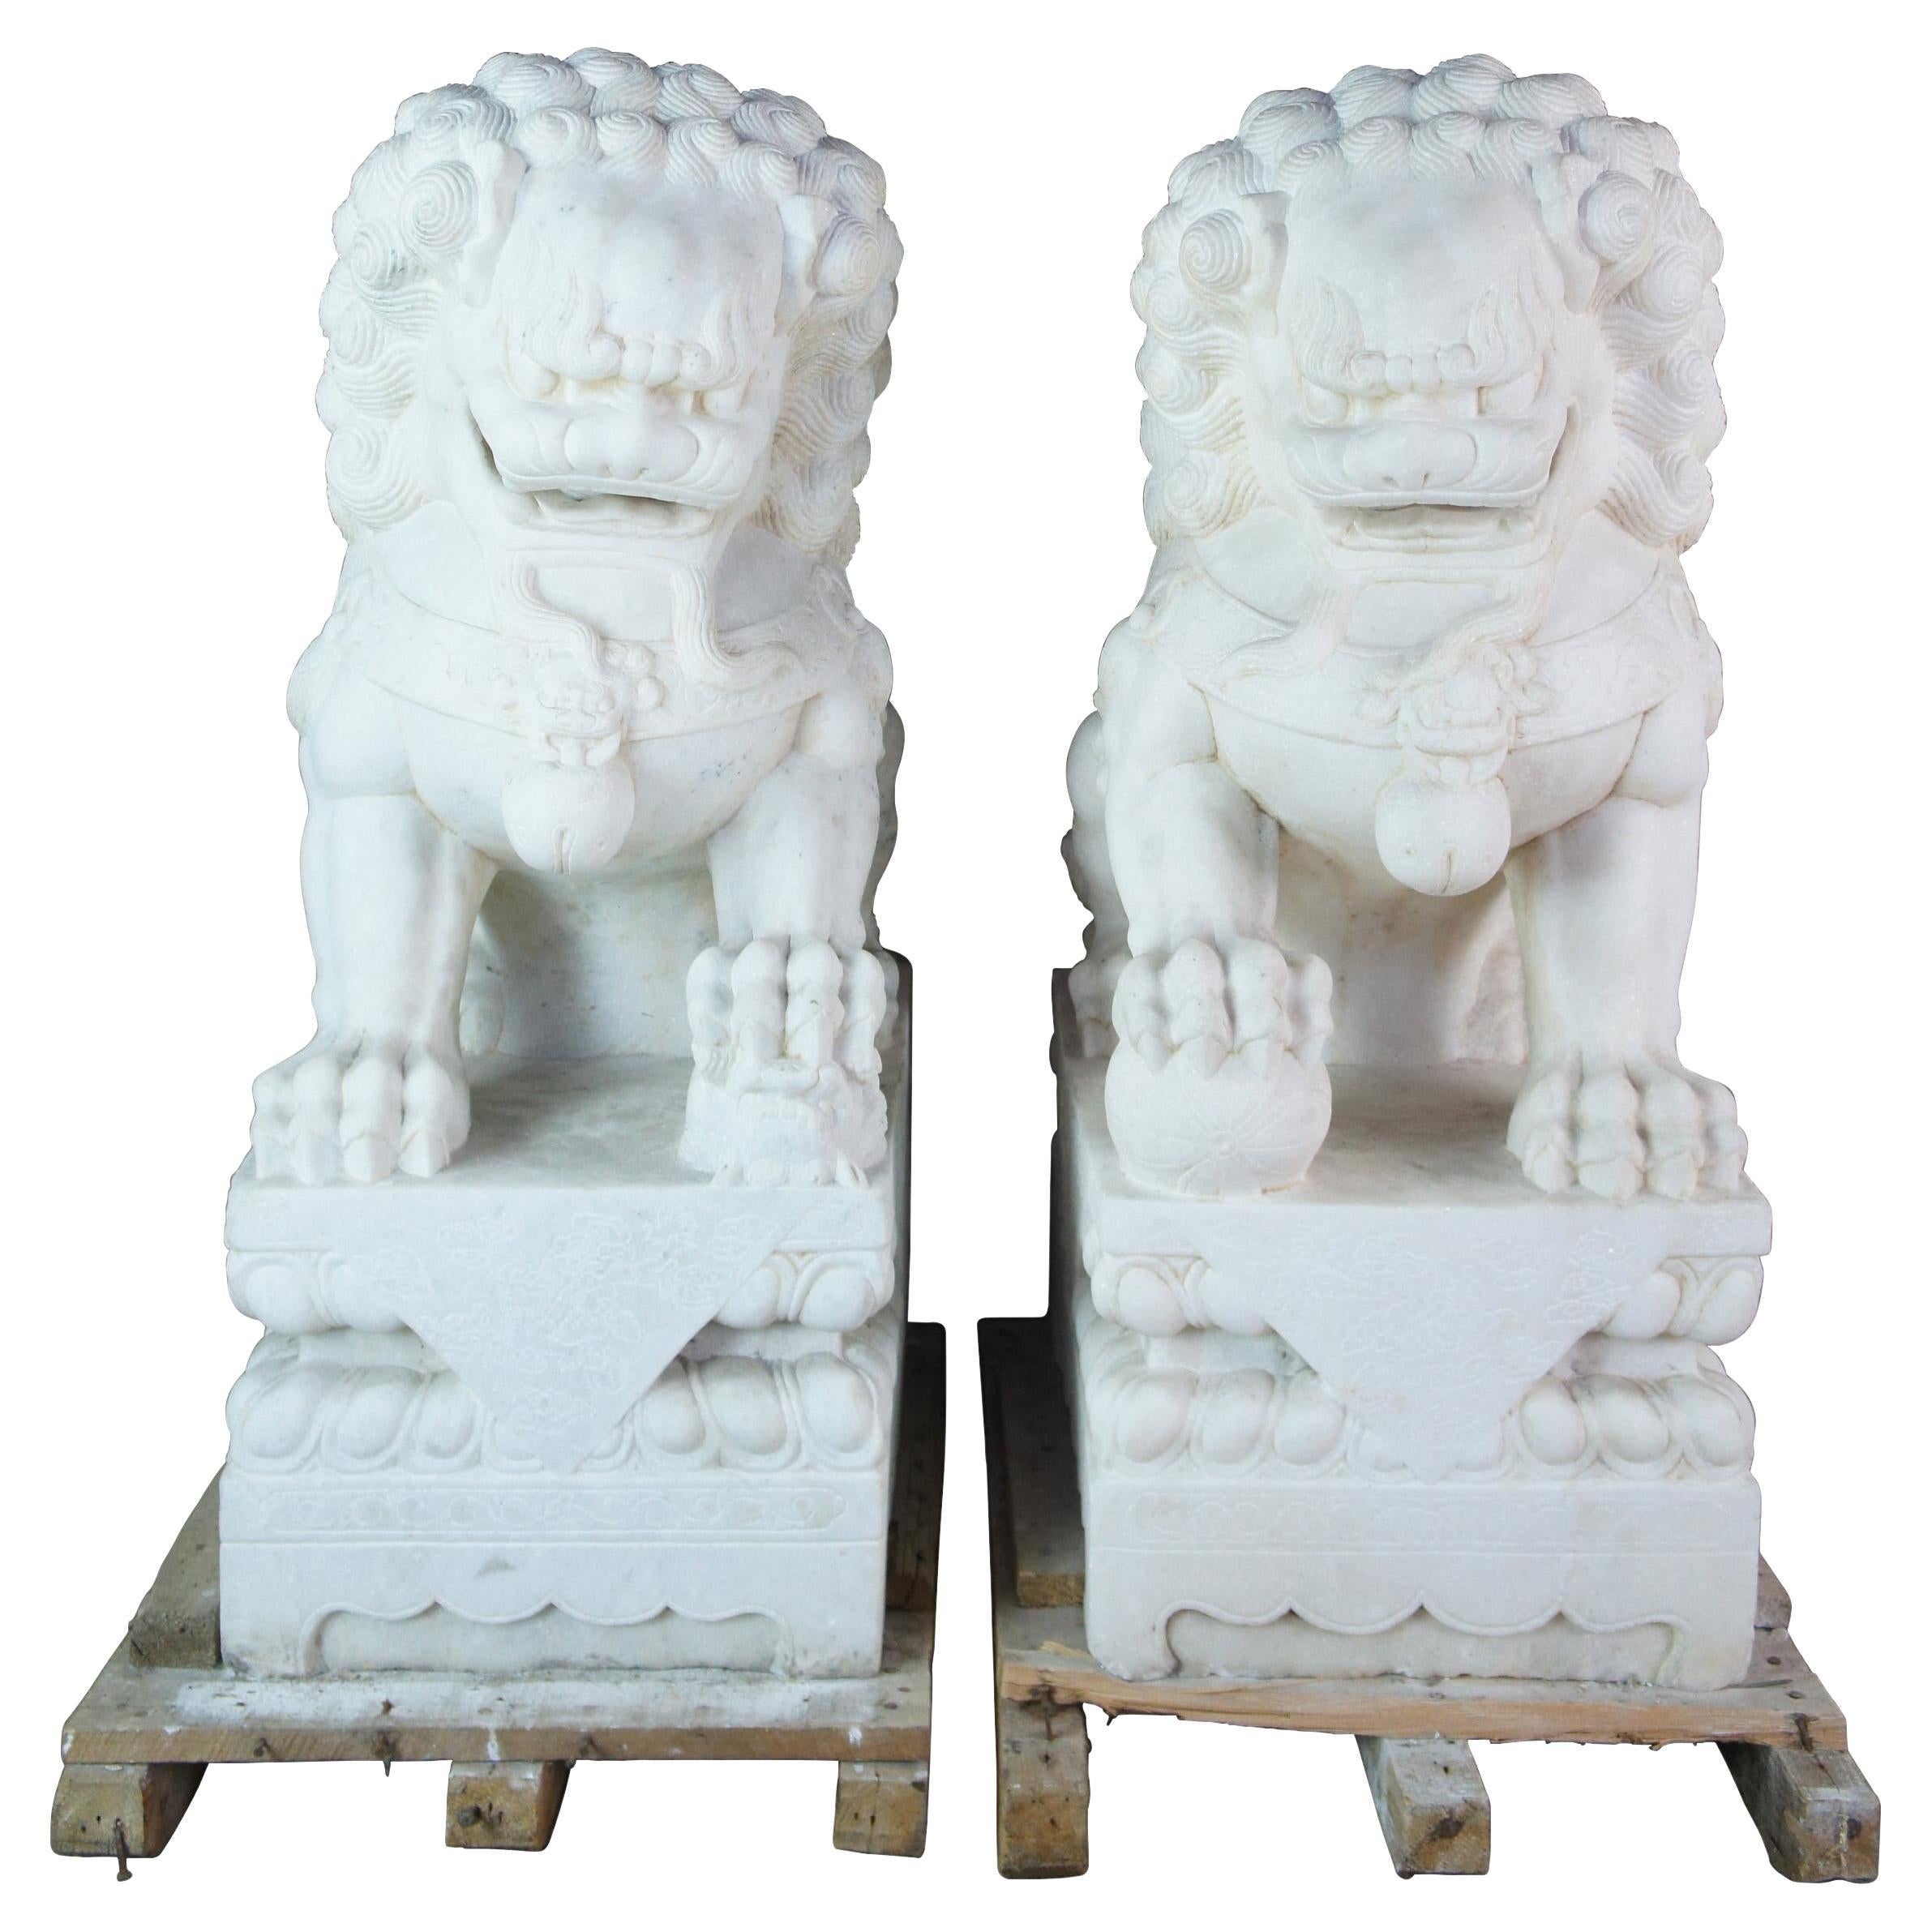 2 Rare Antique Chinese Marble Foo Dog Guardian Lion Fu Temple Garden Statues